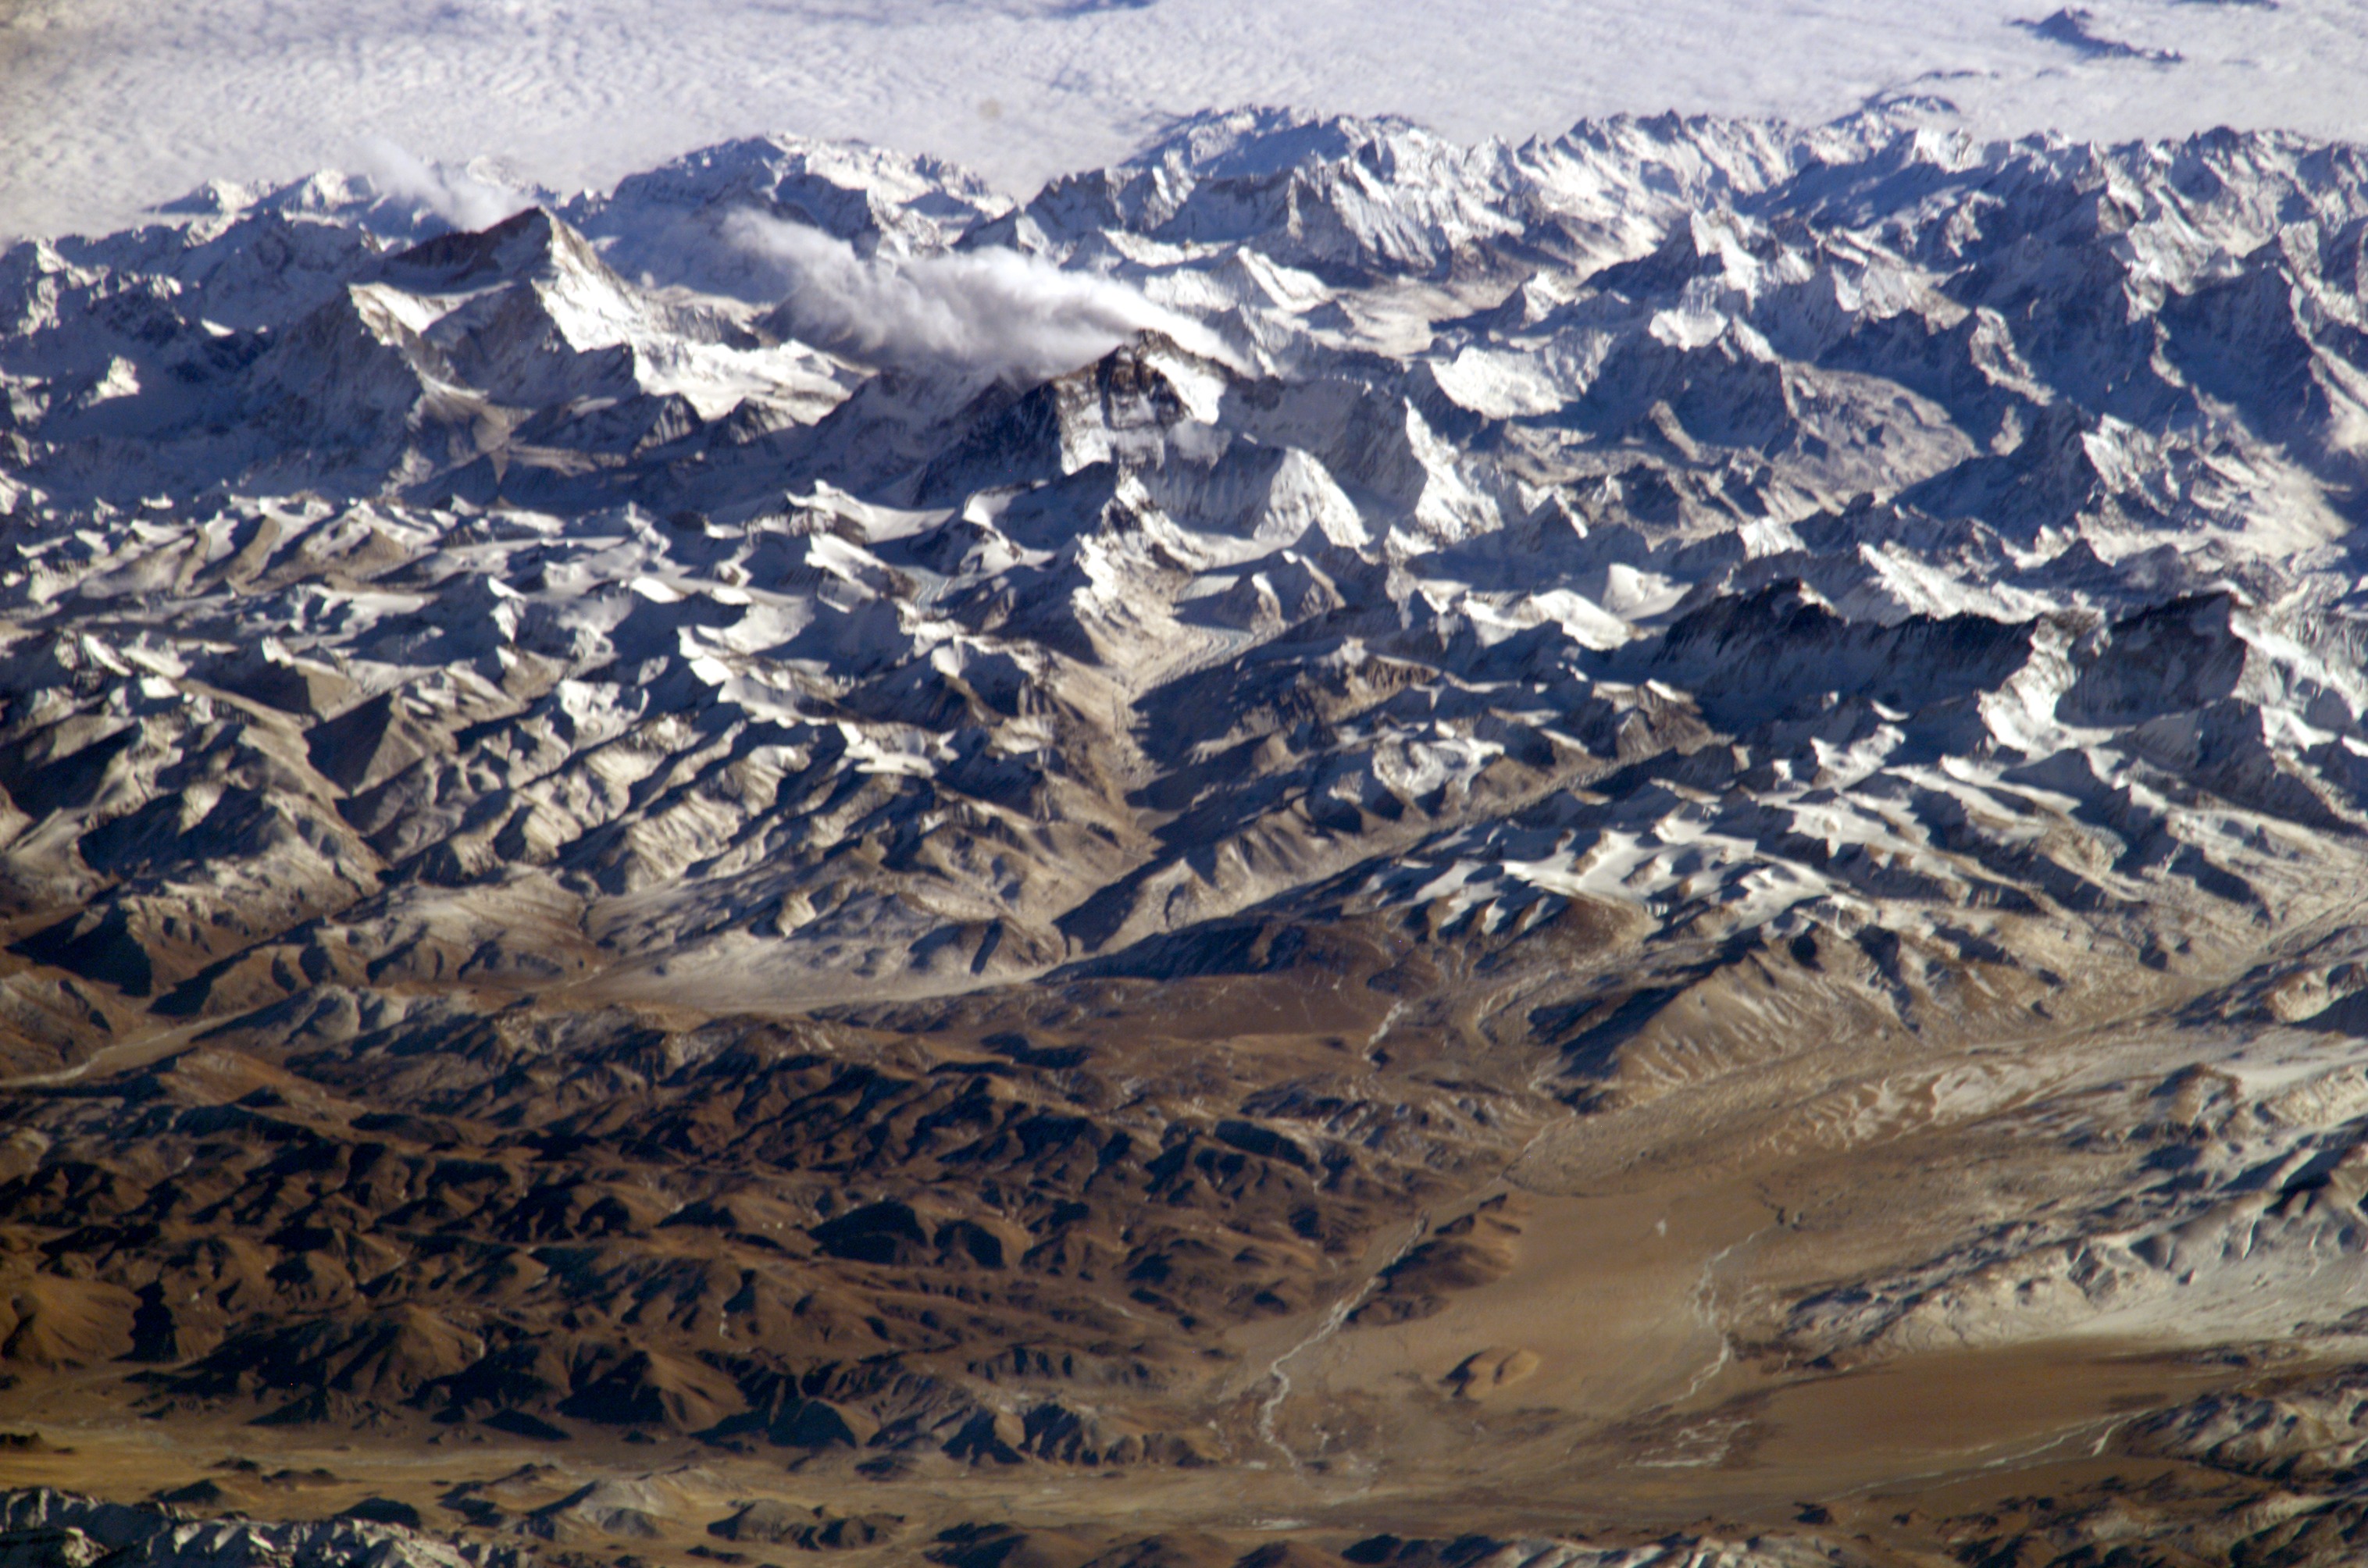 Mt Everest from the space shuttle 